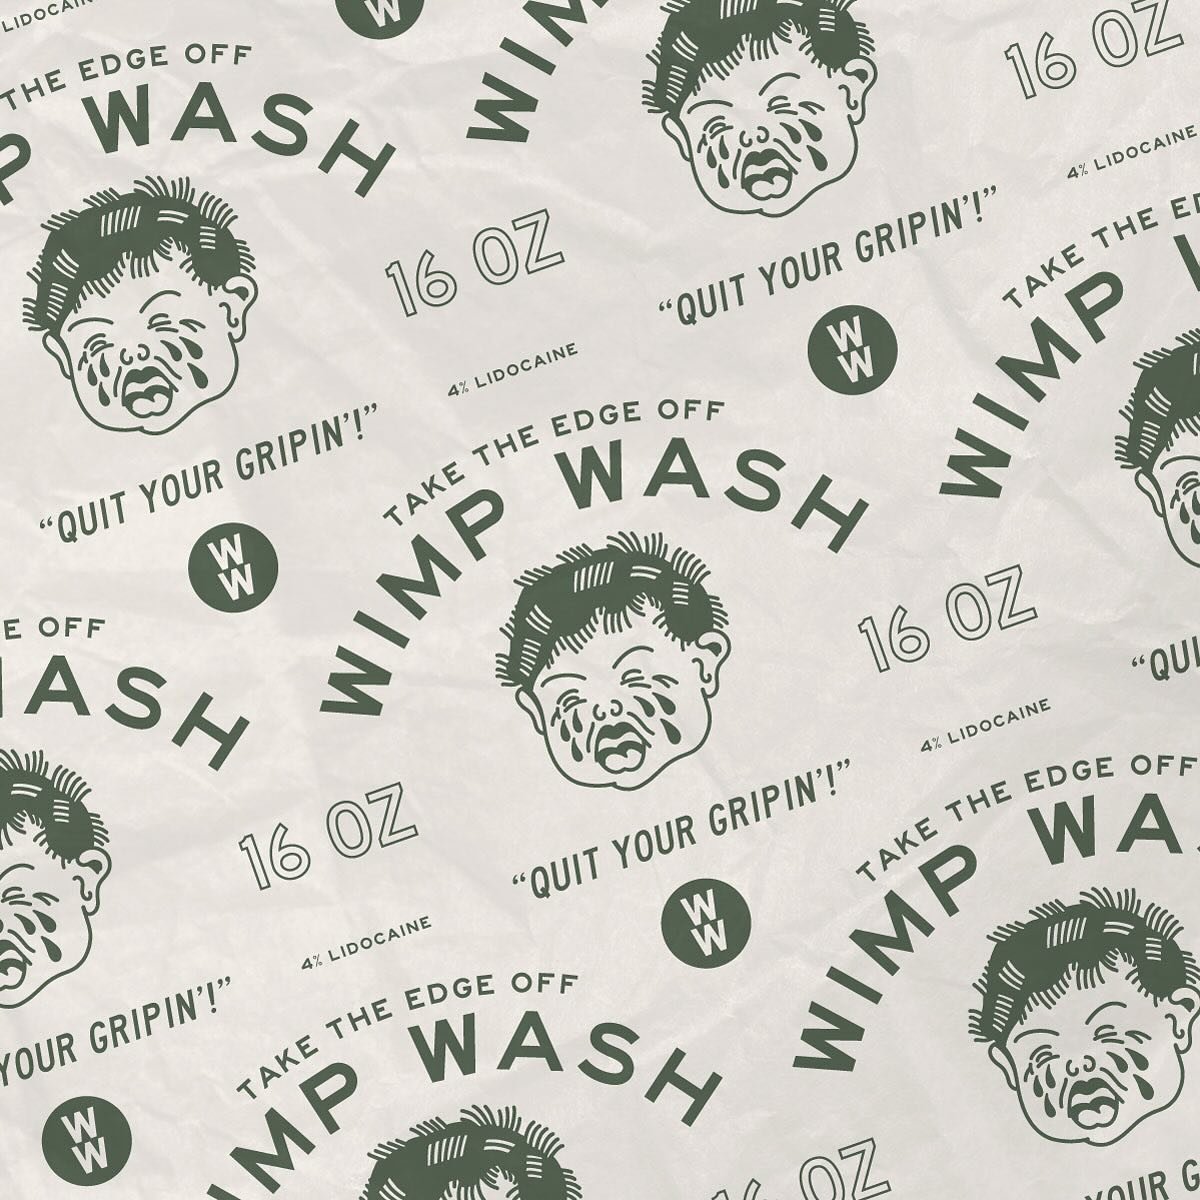 Today, we&rsquo;re reprinting 2,500 labels for a restock of Wimp Wash ❤️ super stoked to be working with @dekeharms on this awesome project and I CANNOT WAIT to share the next Wimp Wash product soon for all you babies.